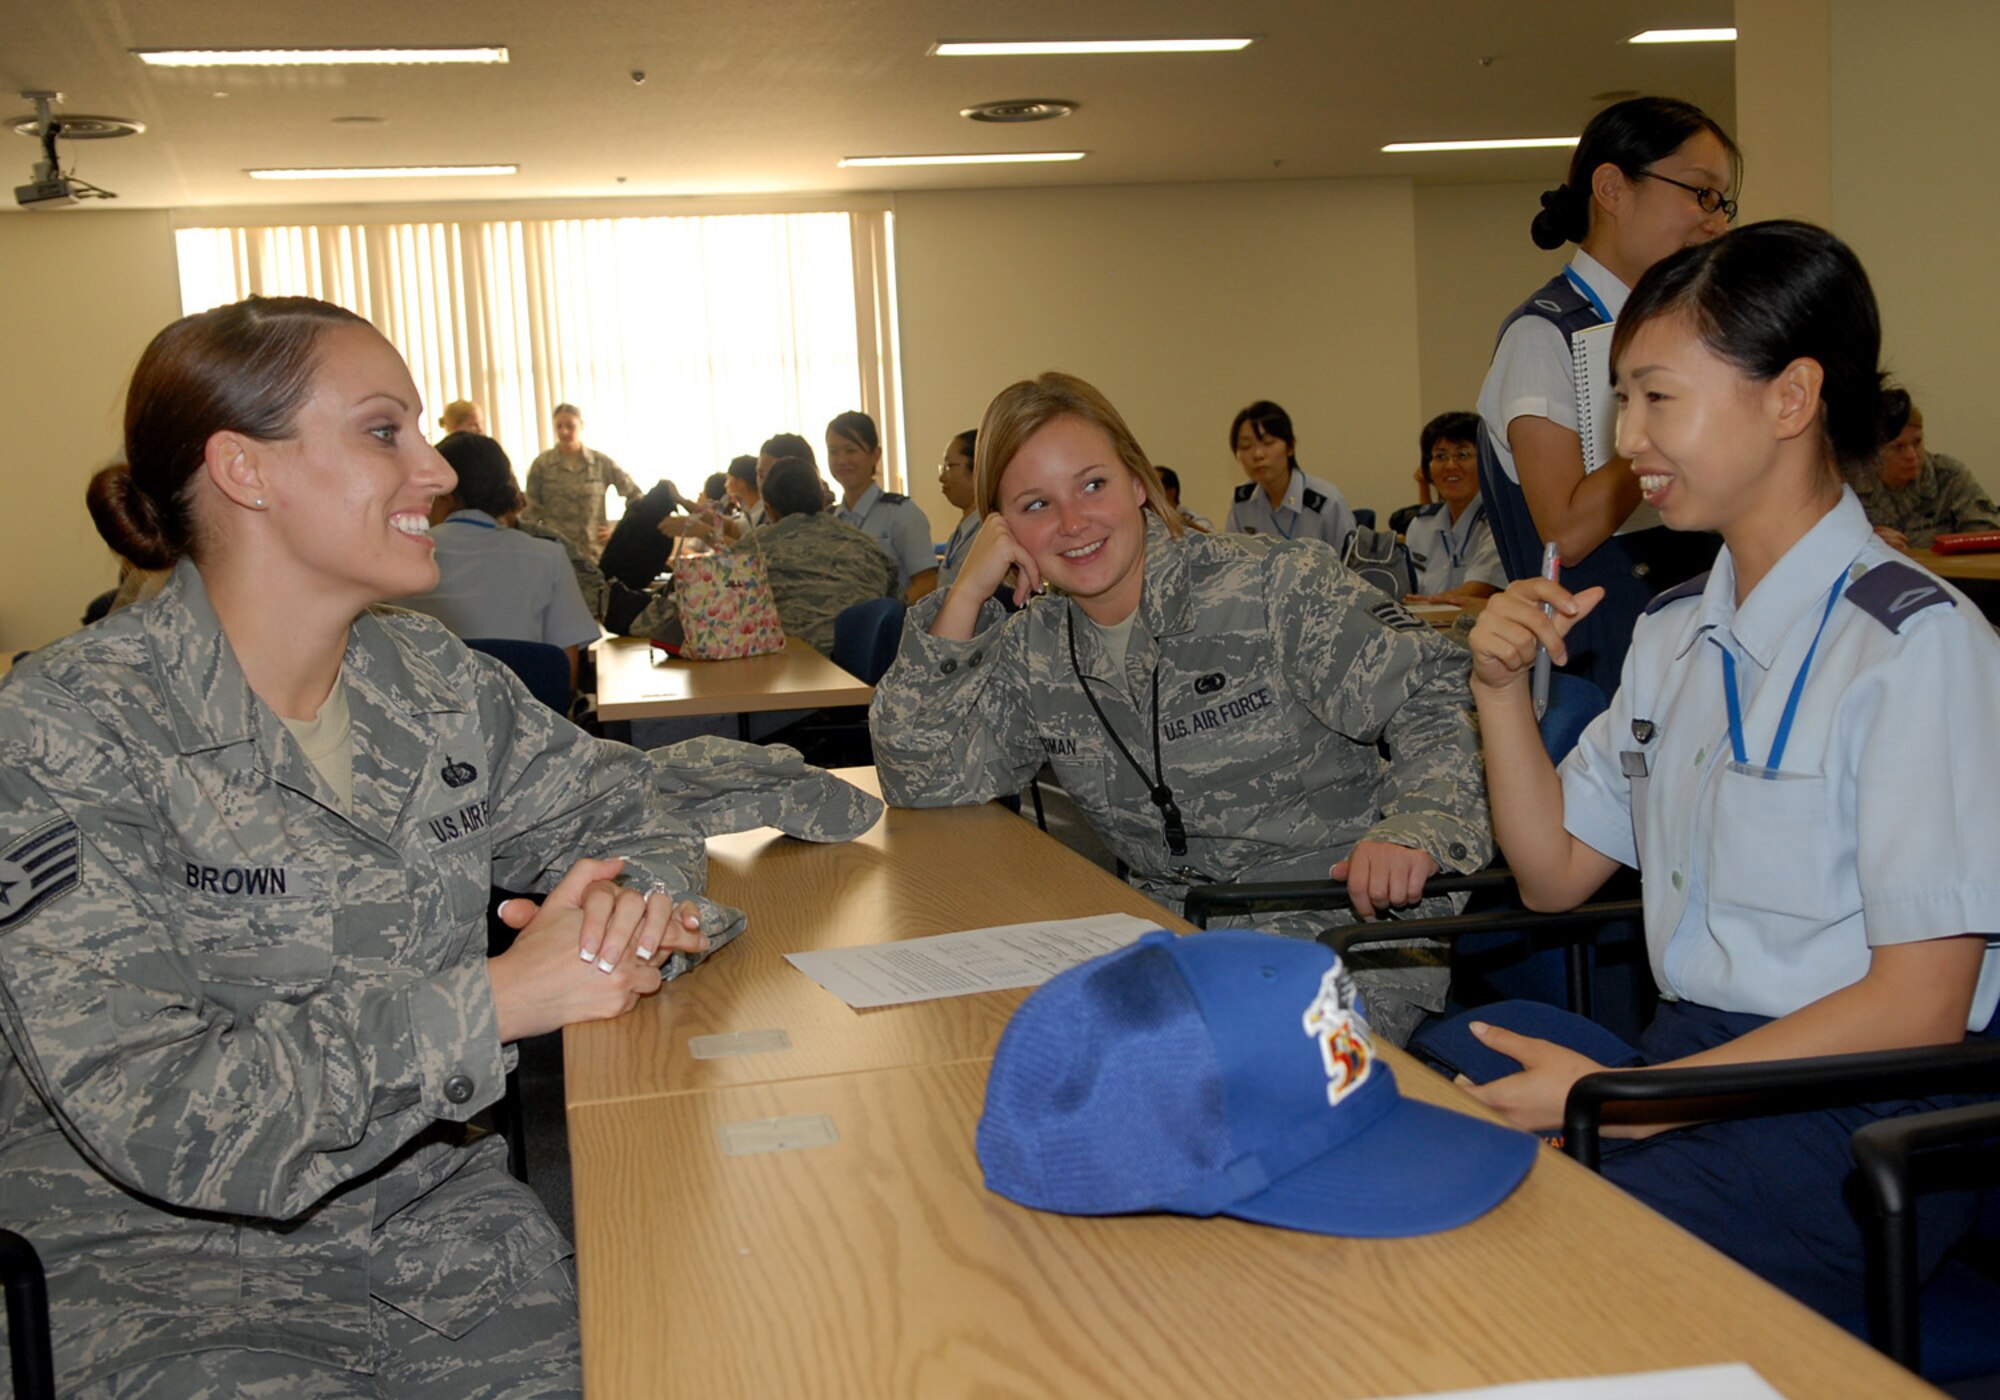 During a seminar at the education and training center at Kadena Air Base, Staff Sgt. Lacey Brown (far left), from the 18th Force Support Squadron and Staff Sgt. Amber Ledman(center), from the 82nd Reconnaissance Squadron, interact with Staff Sgt. Saori Nakamura(far right),  of the 83rd Air Wing from Naha Air Base.  The Japan Air Self-Defense Force Airmen were visiting for a seminar and tour of Kadena Air Base on Oct. 28. (U.S. Air Force photo/Junko Kinjo)


